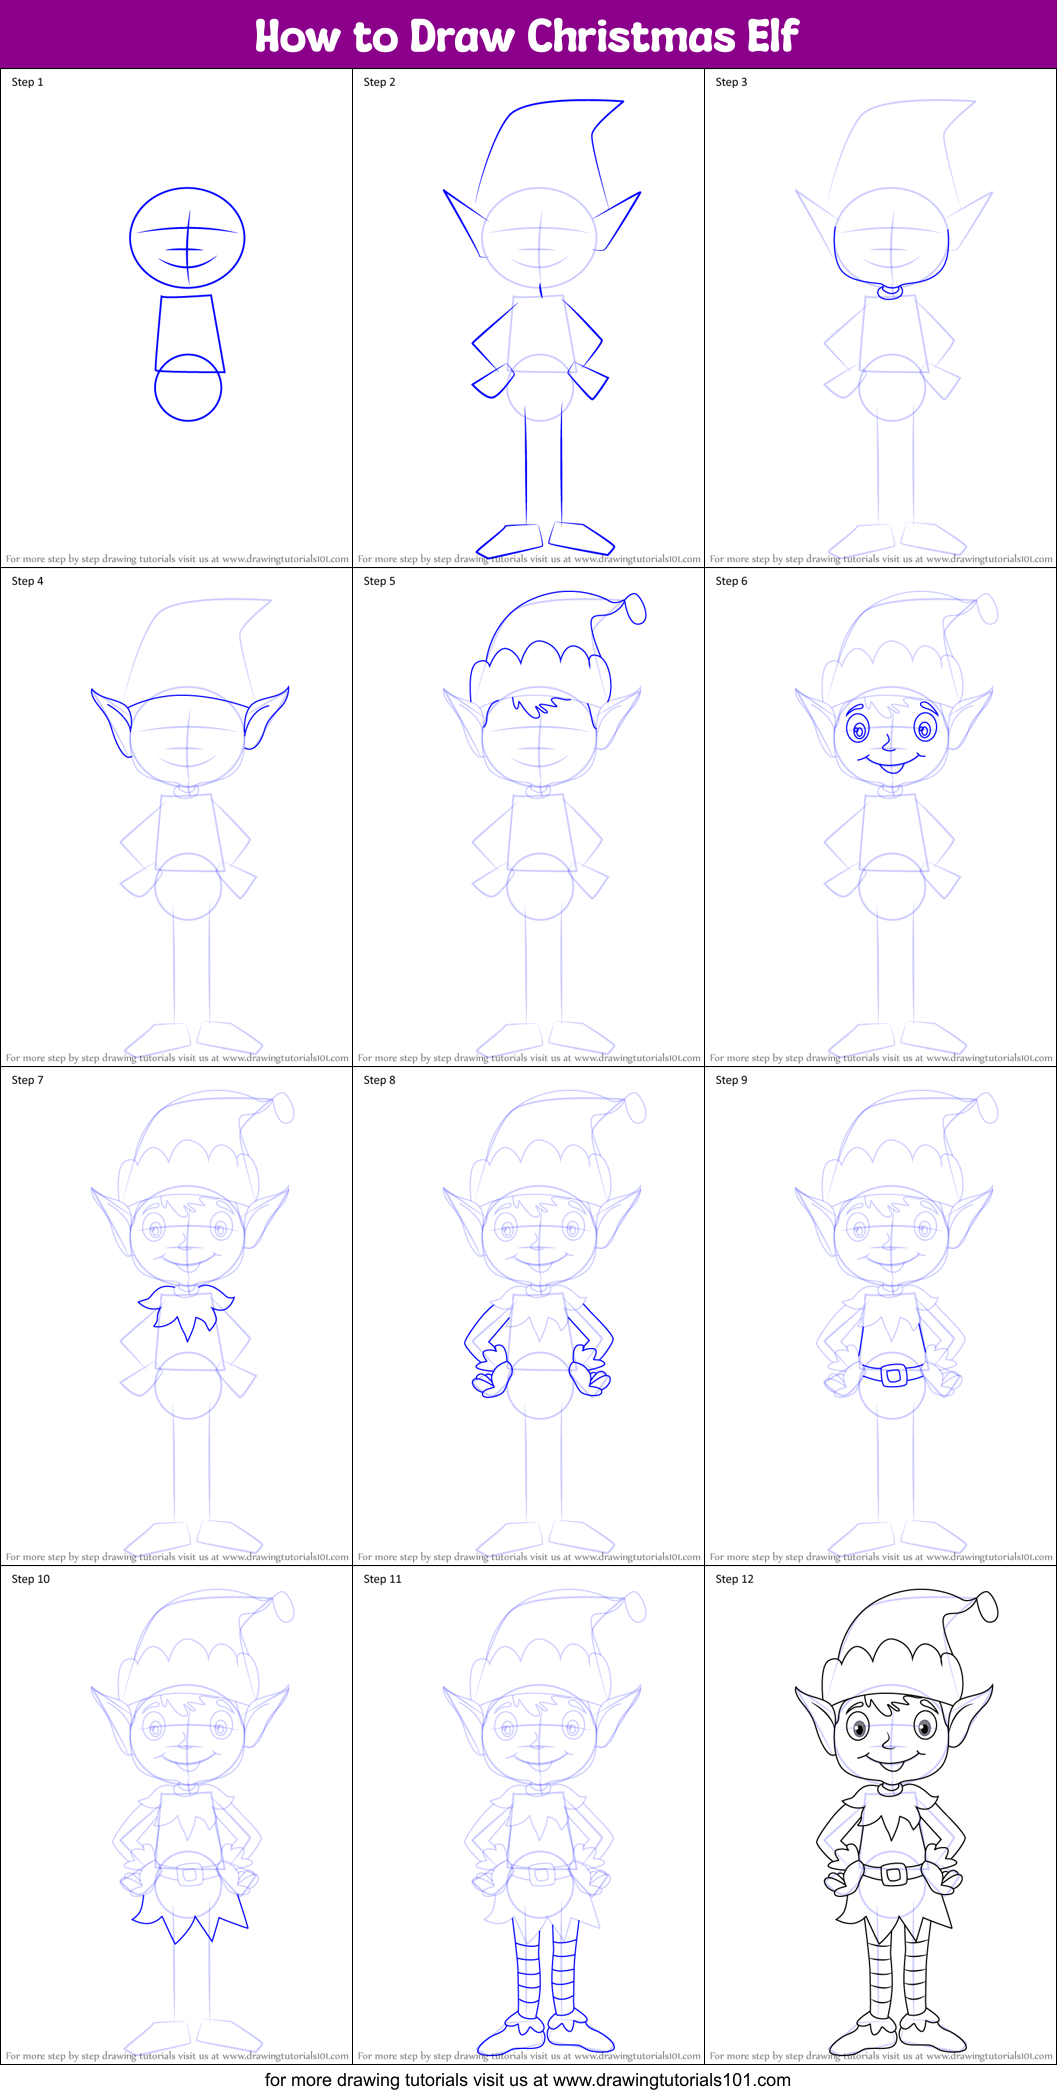 How to Draw Christmas Elf printable step by step drawing sheet